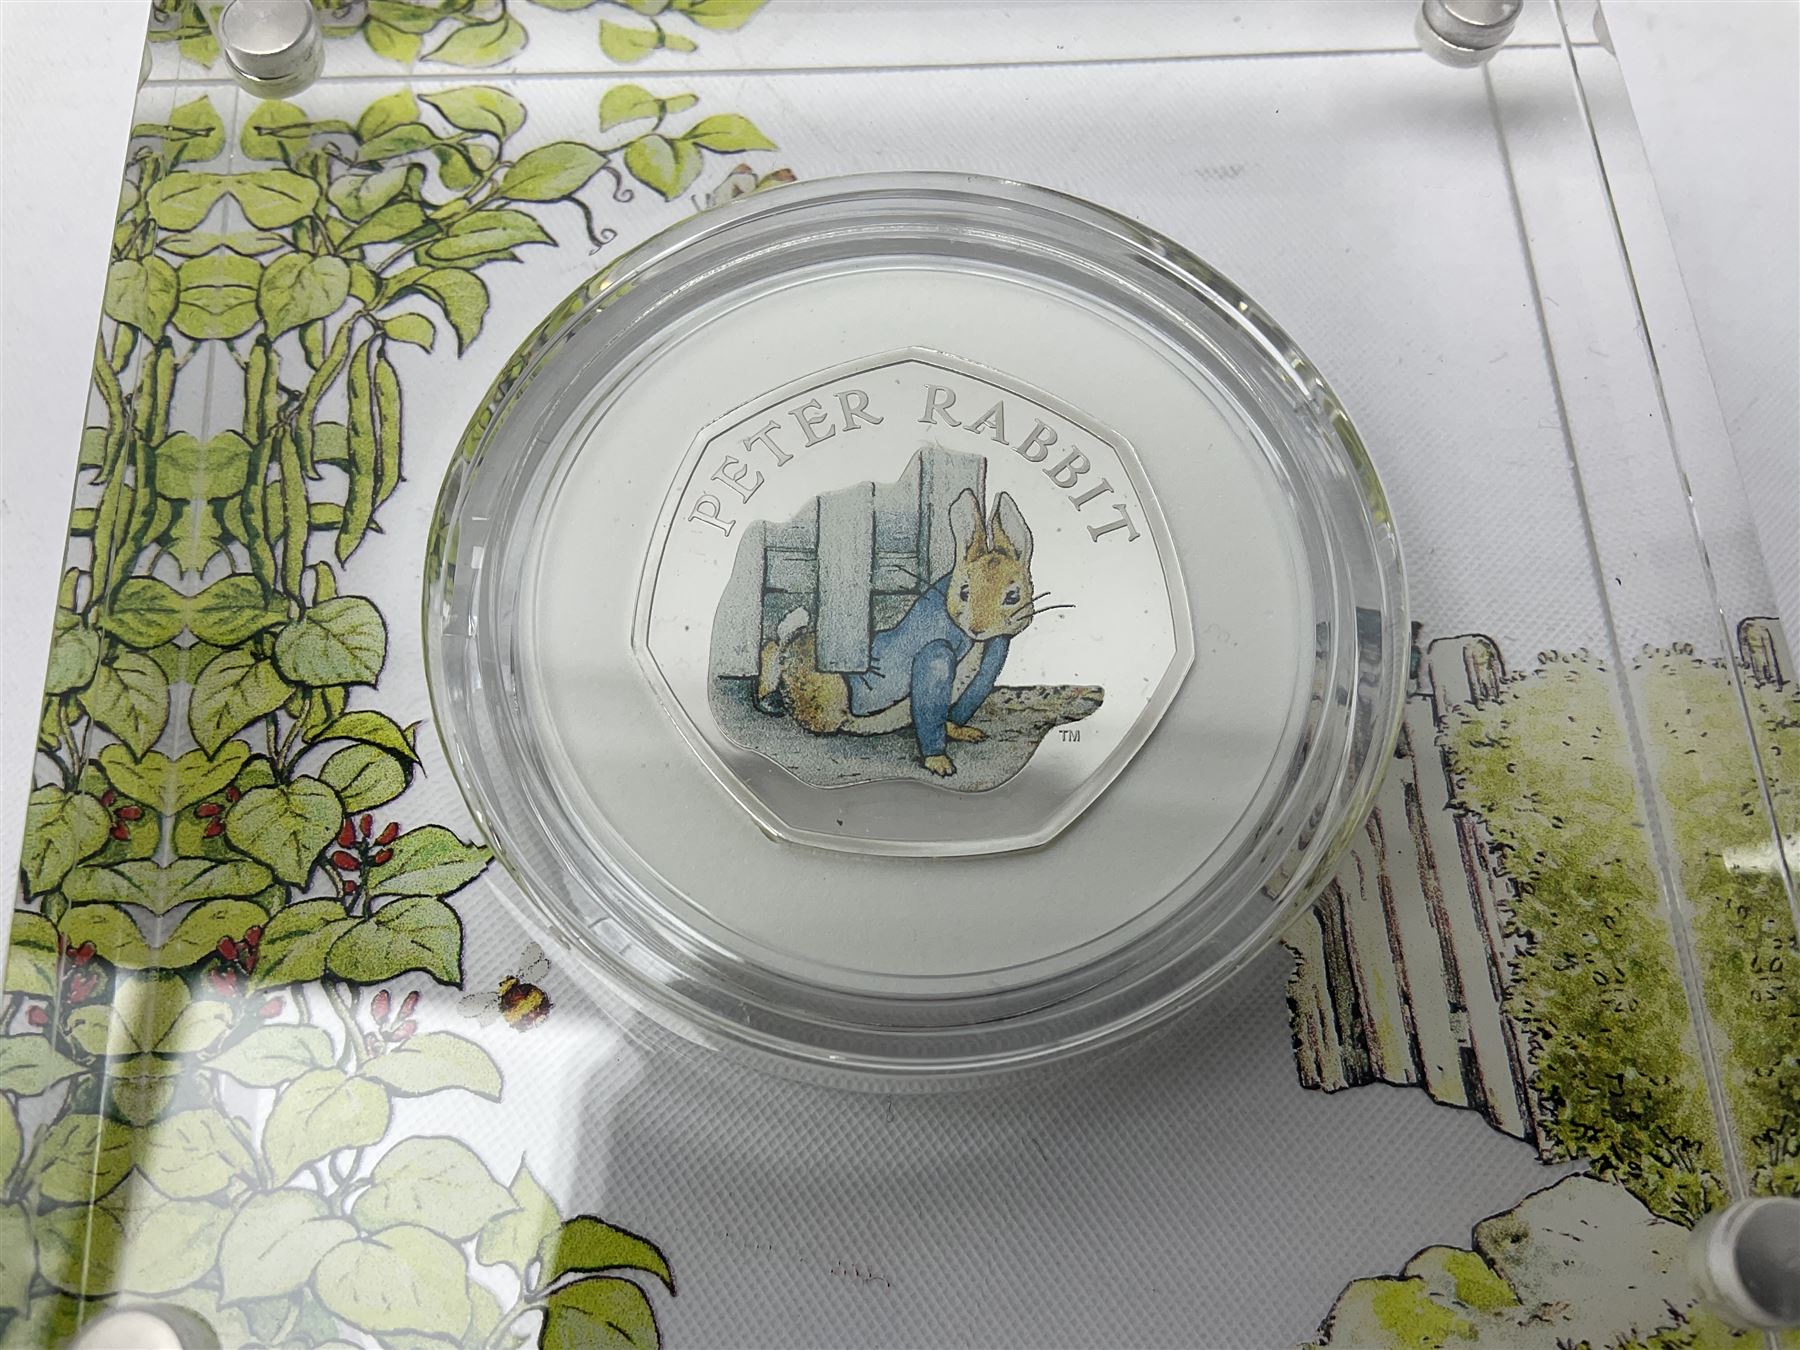 Two The Royal Mint United Kingdom 2020 'Peter Rabbit' silver proof fifty pence coins - Image 5 of 8